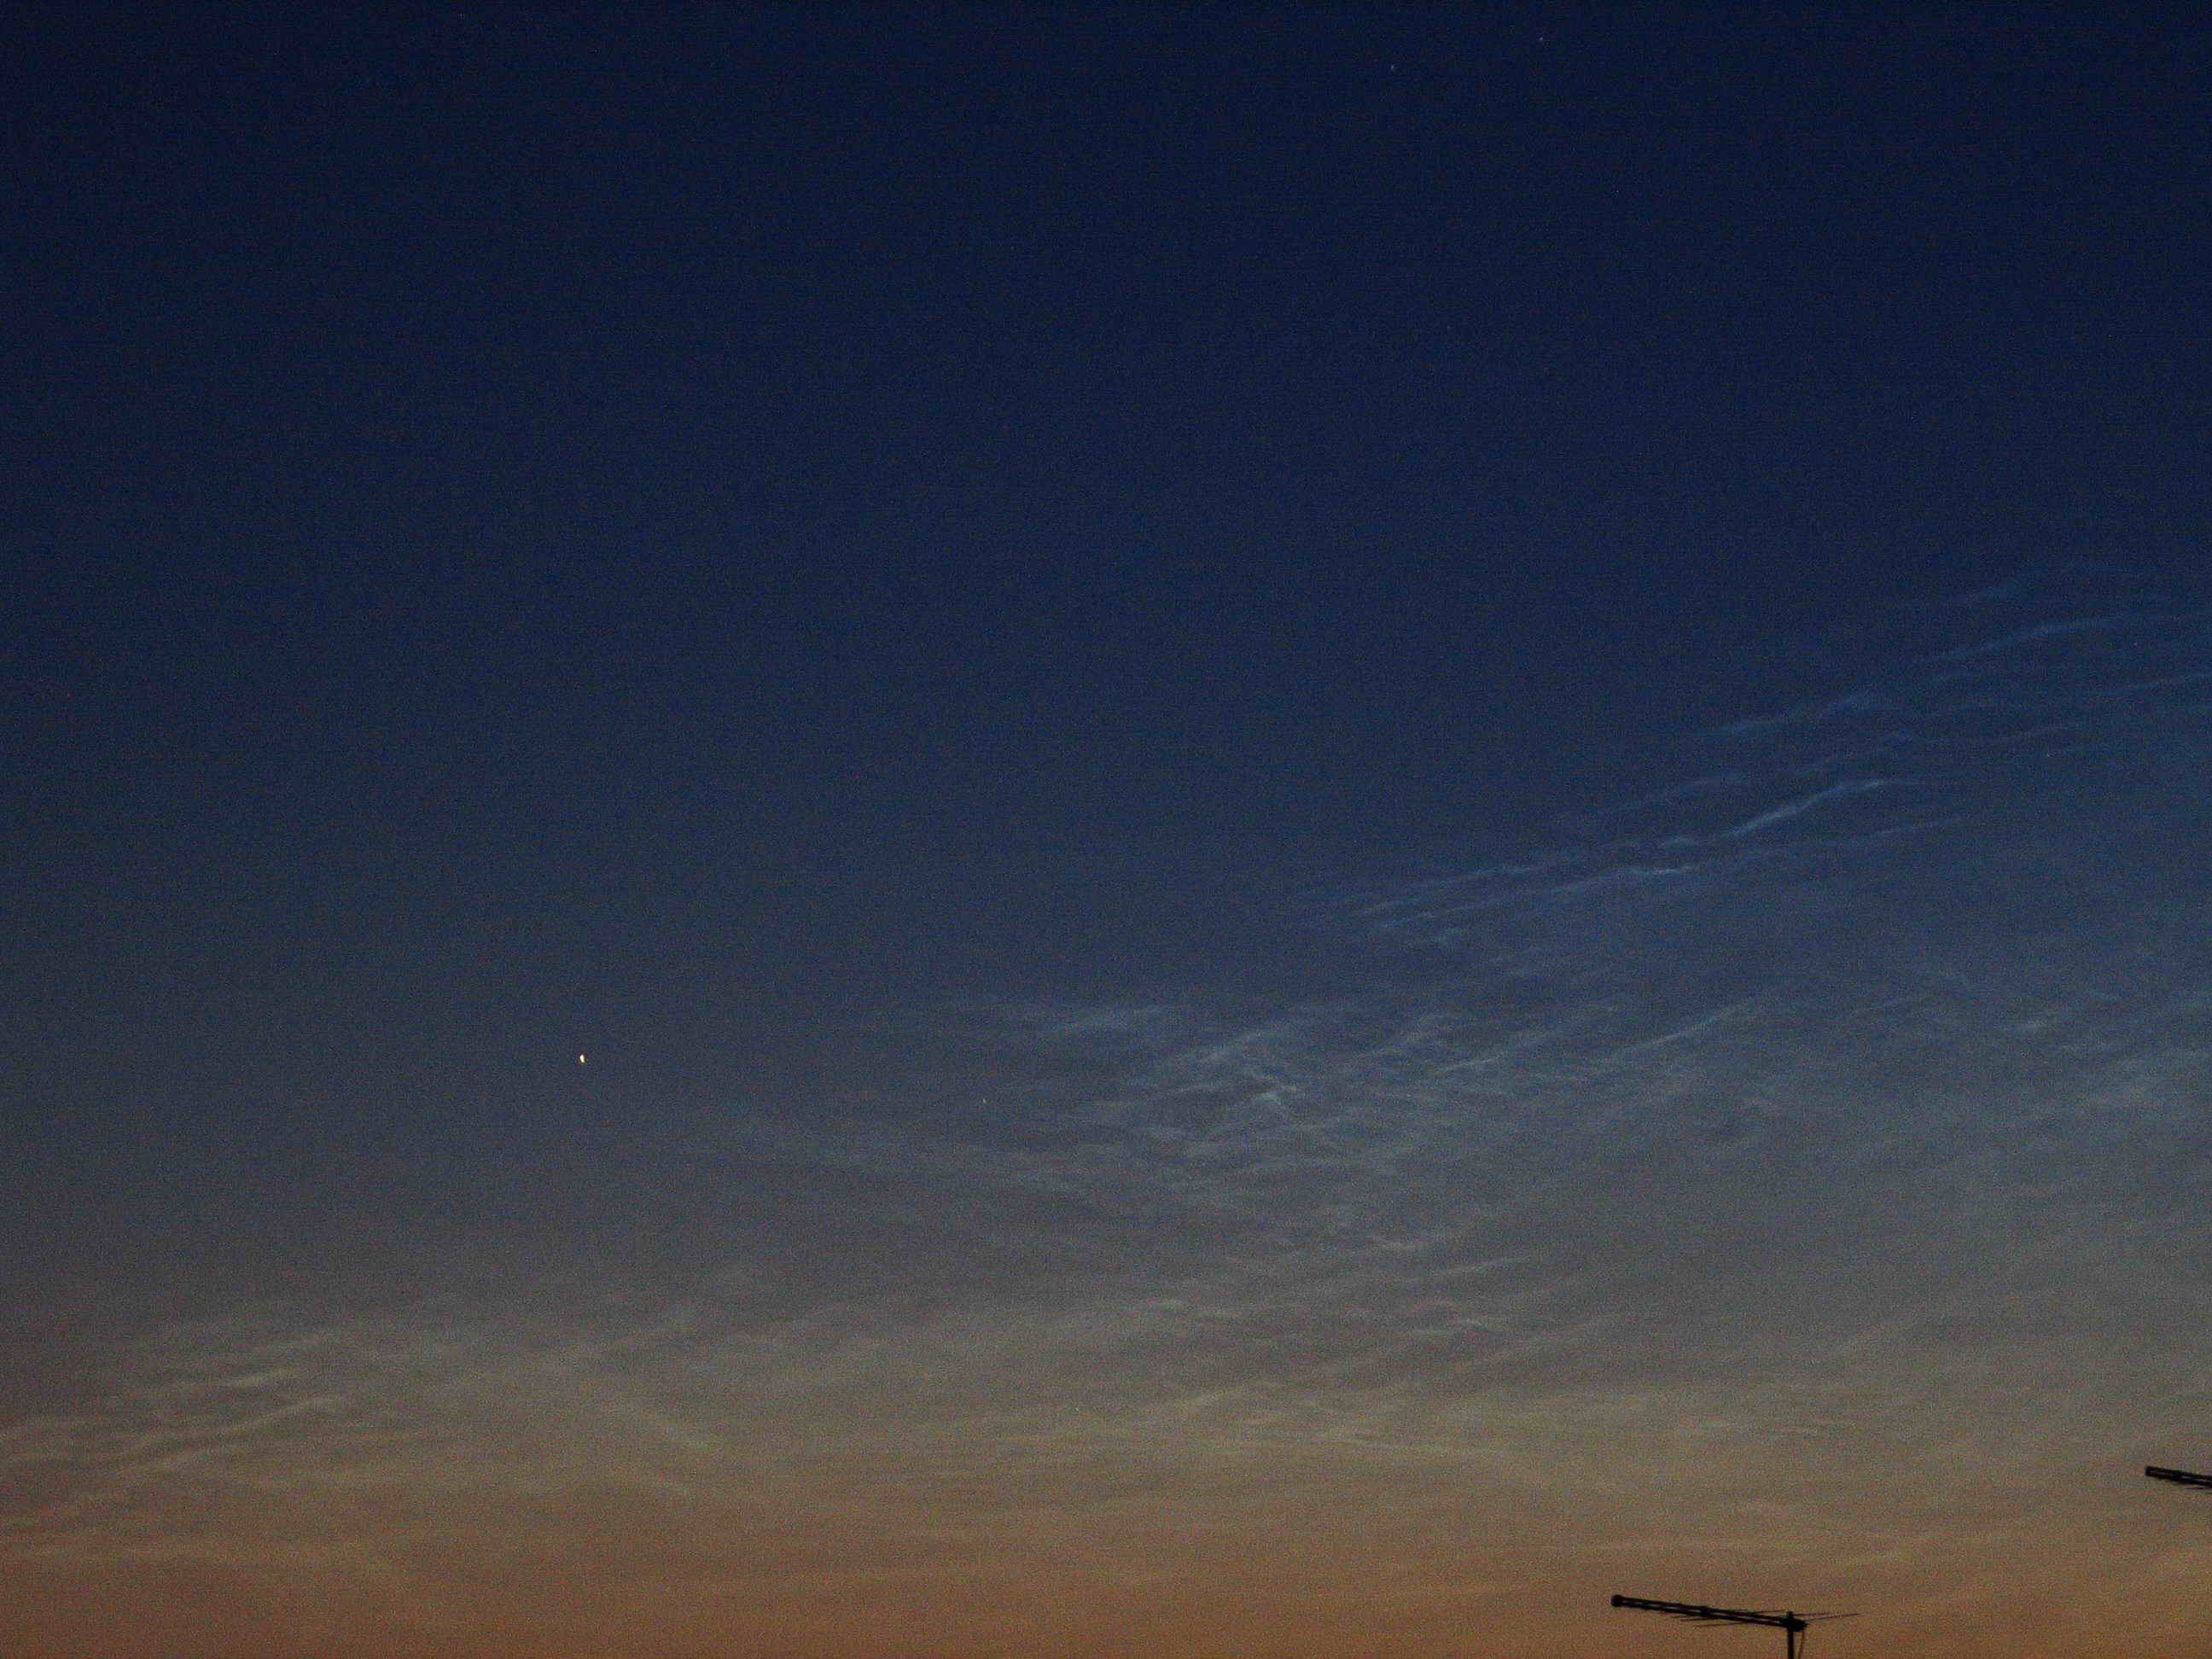 Noctilucent clouds over Venice: 250 KB; click on the image to enlarge